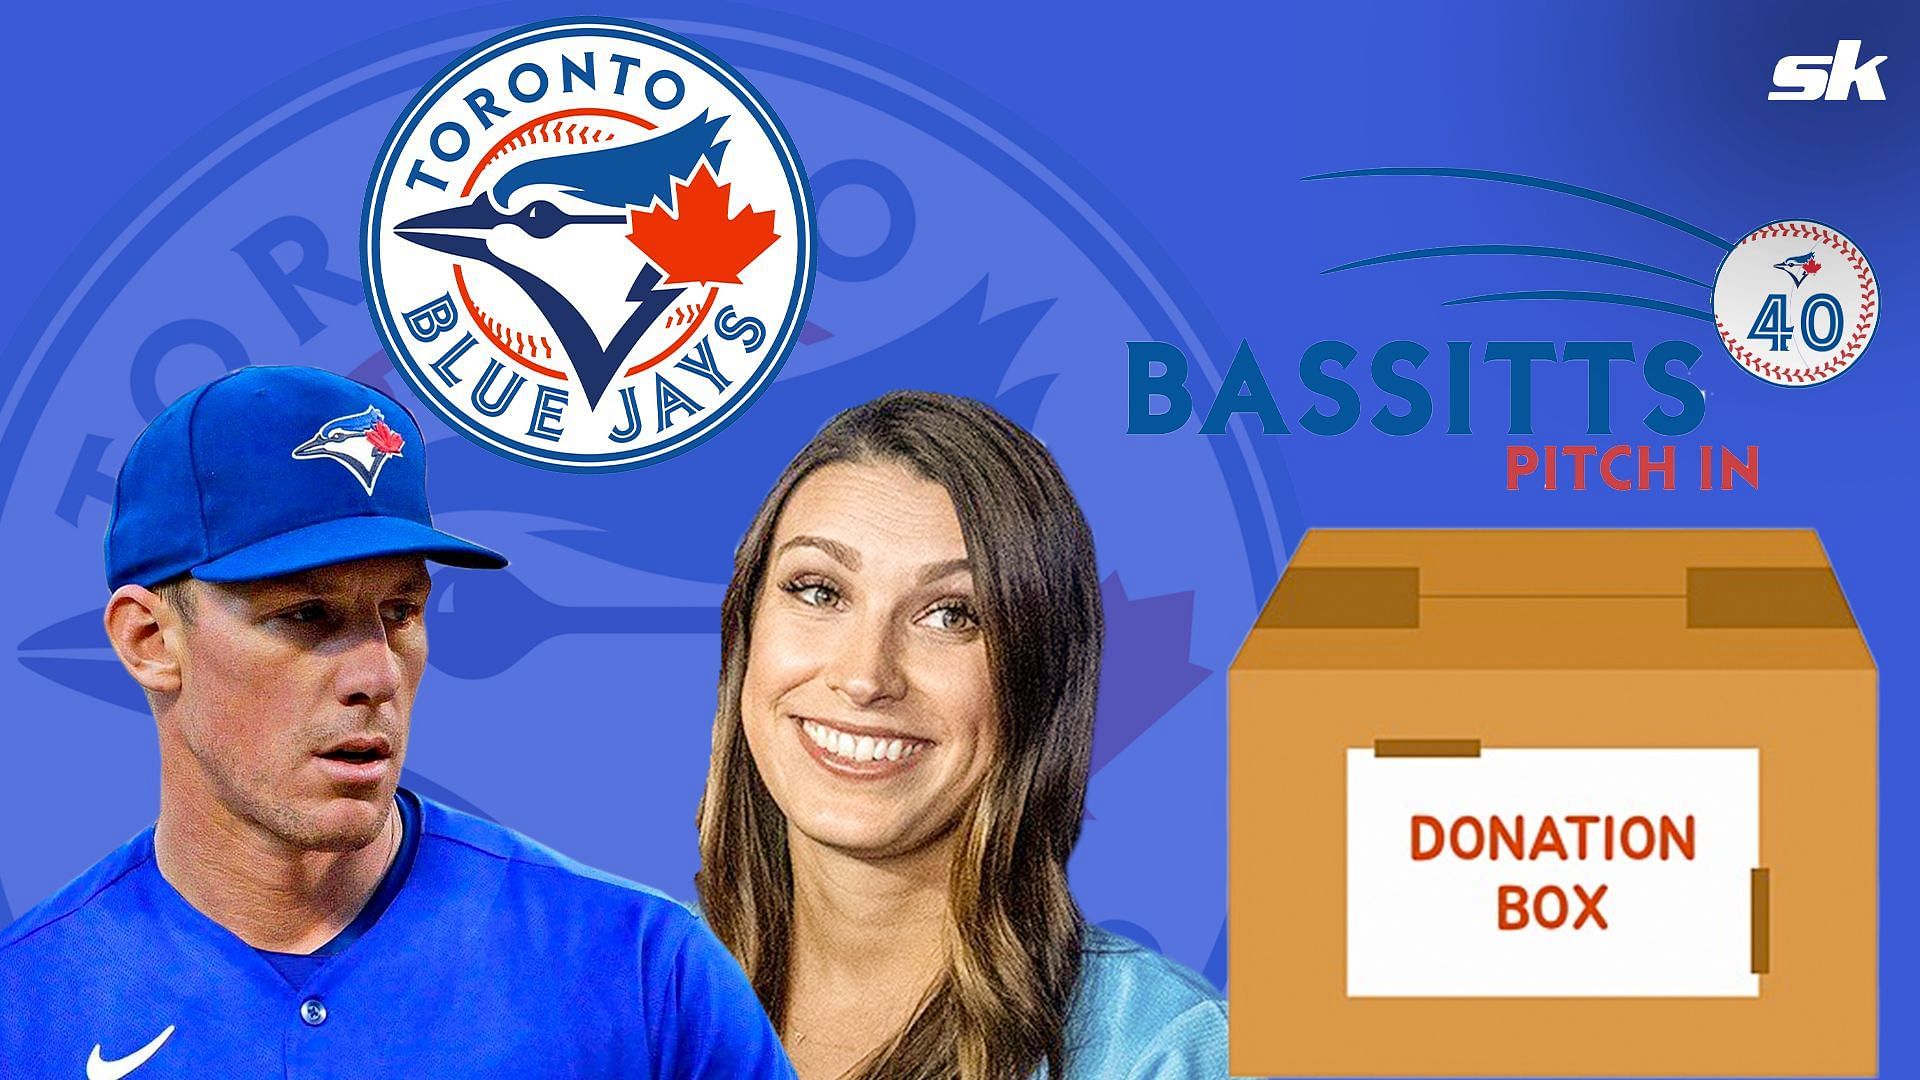 Chris bassitt: Blue Jays ace Chris Bassitt and wife Jessica donate $120,000  to support youth sports program, empowering under-resourced communities